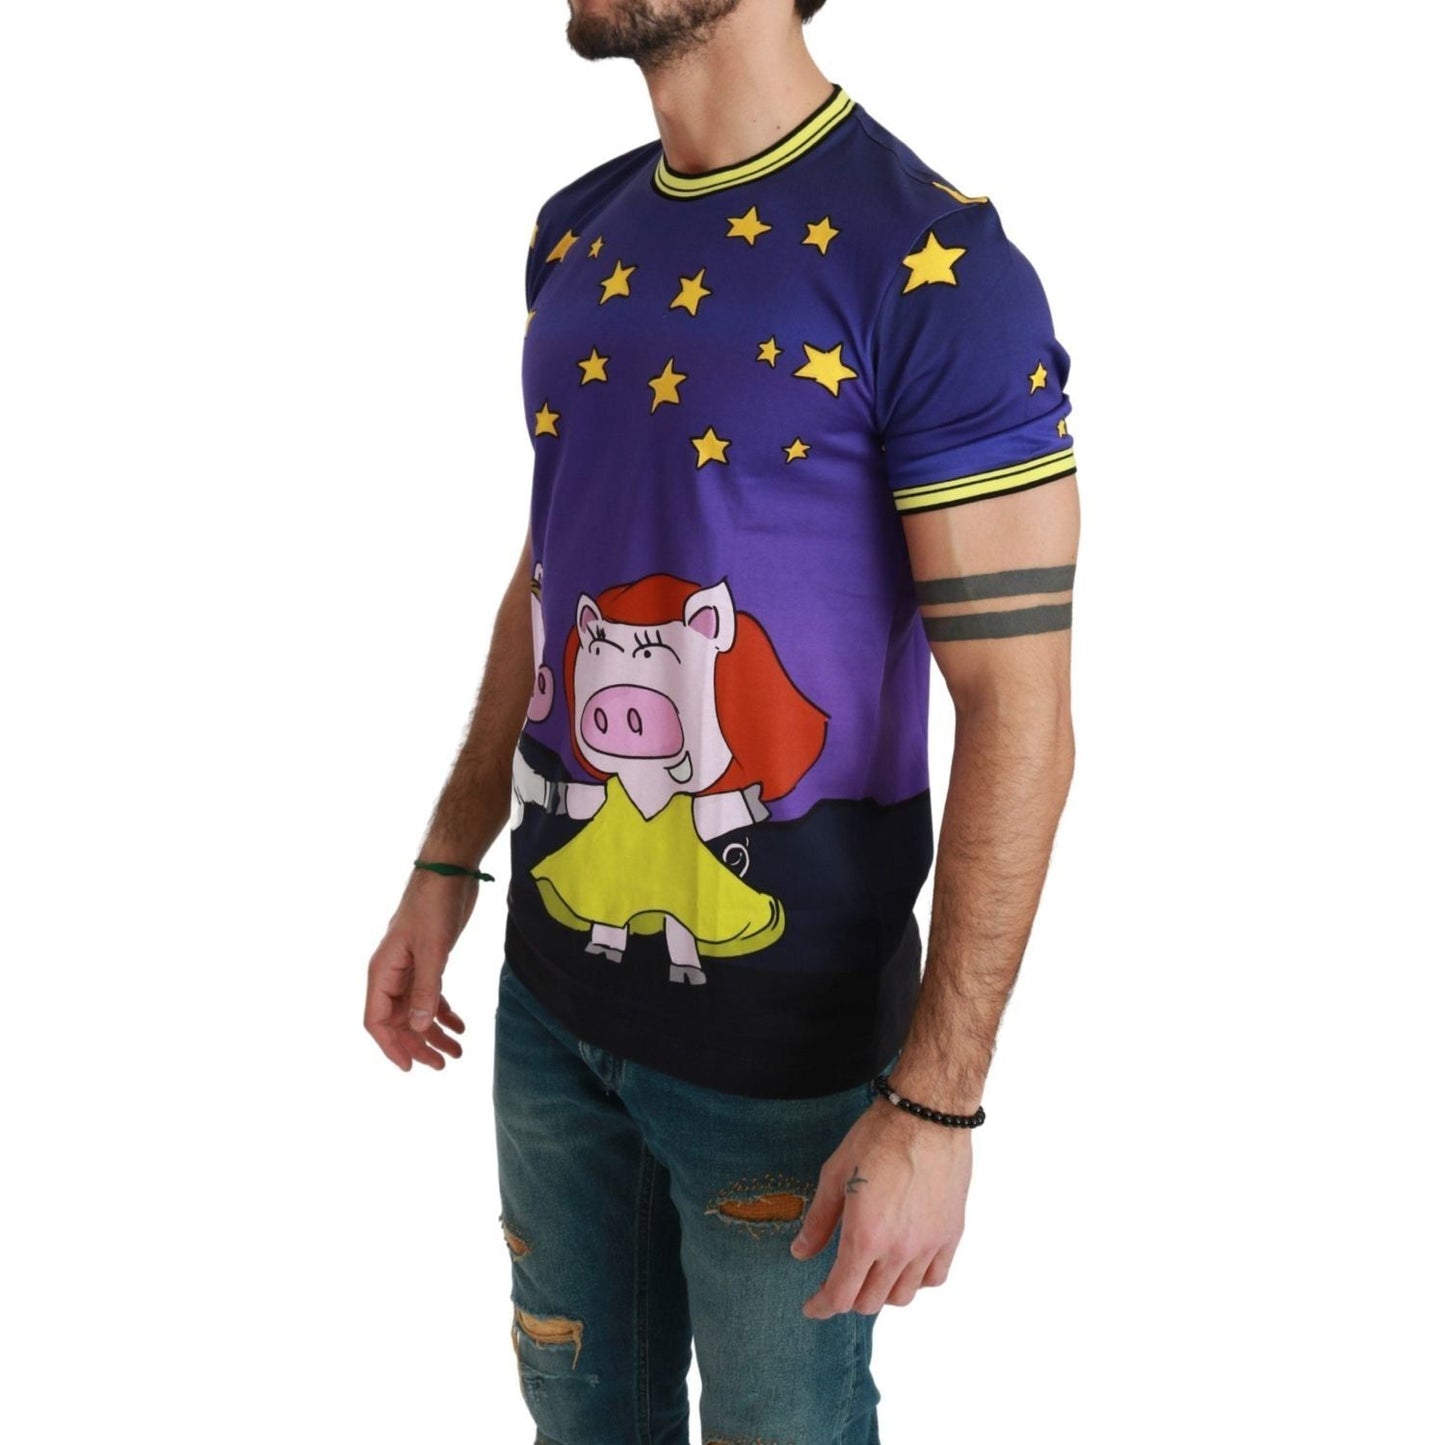 Dolce & Gabbana Purple Cotton Round Neck T-Shirt with Pig Motif purple-cotton-top-2019-year-of-the-pig-t-shirt